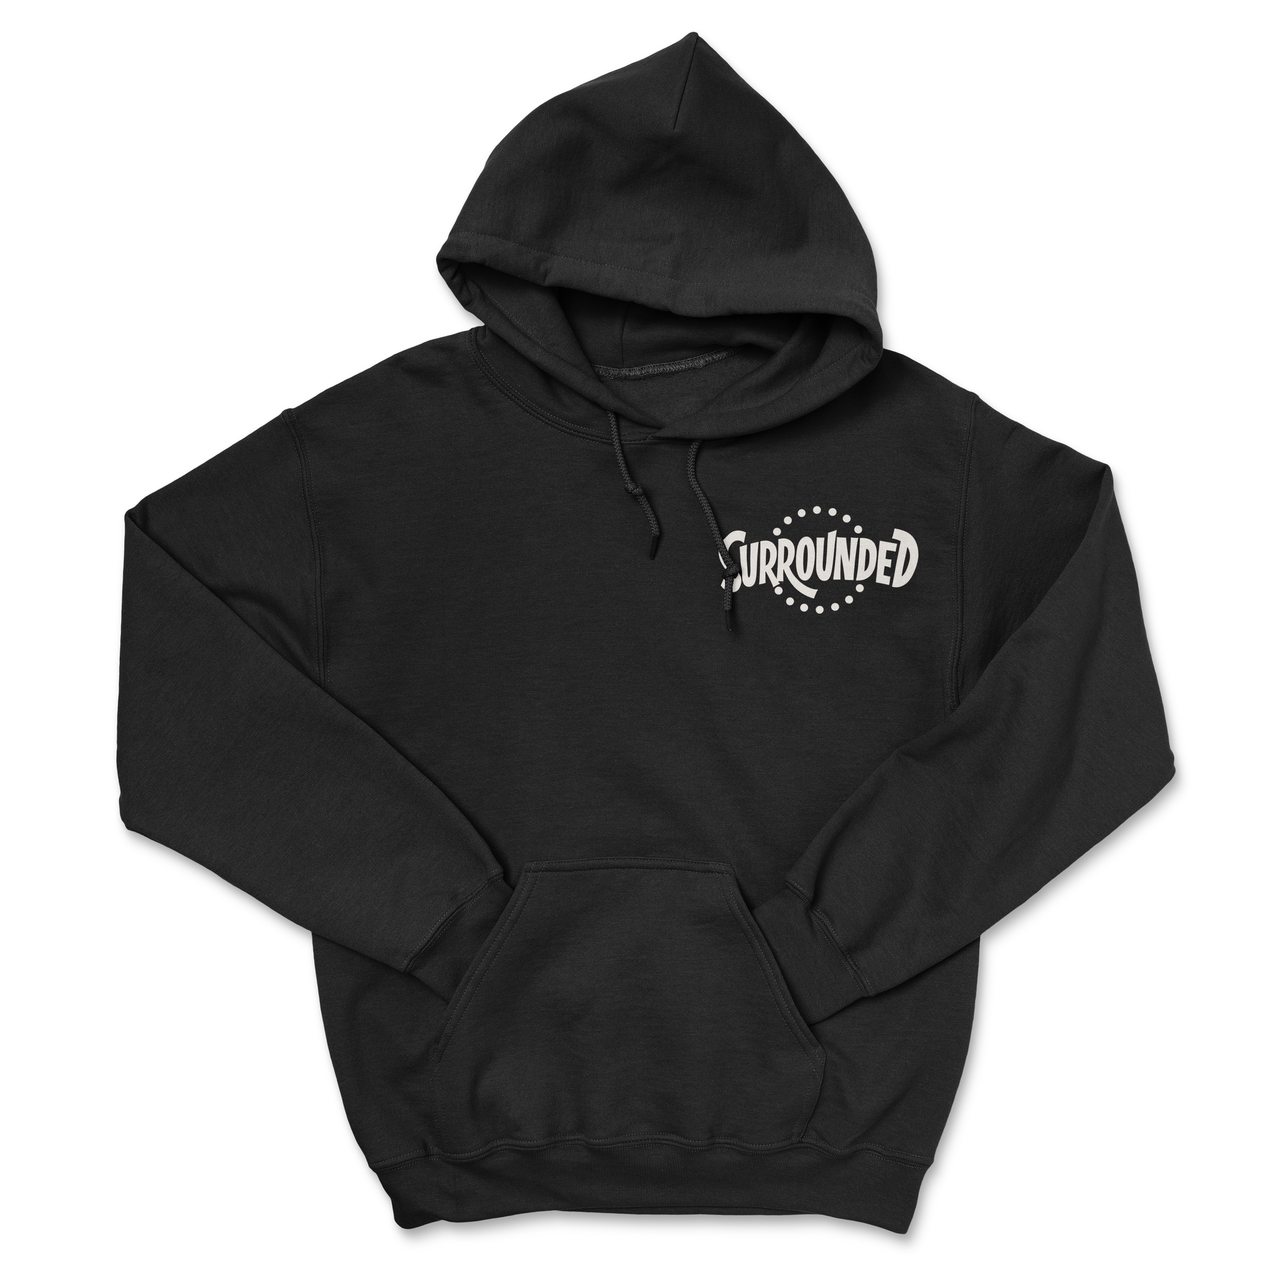 Surrounded Hoodie